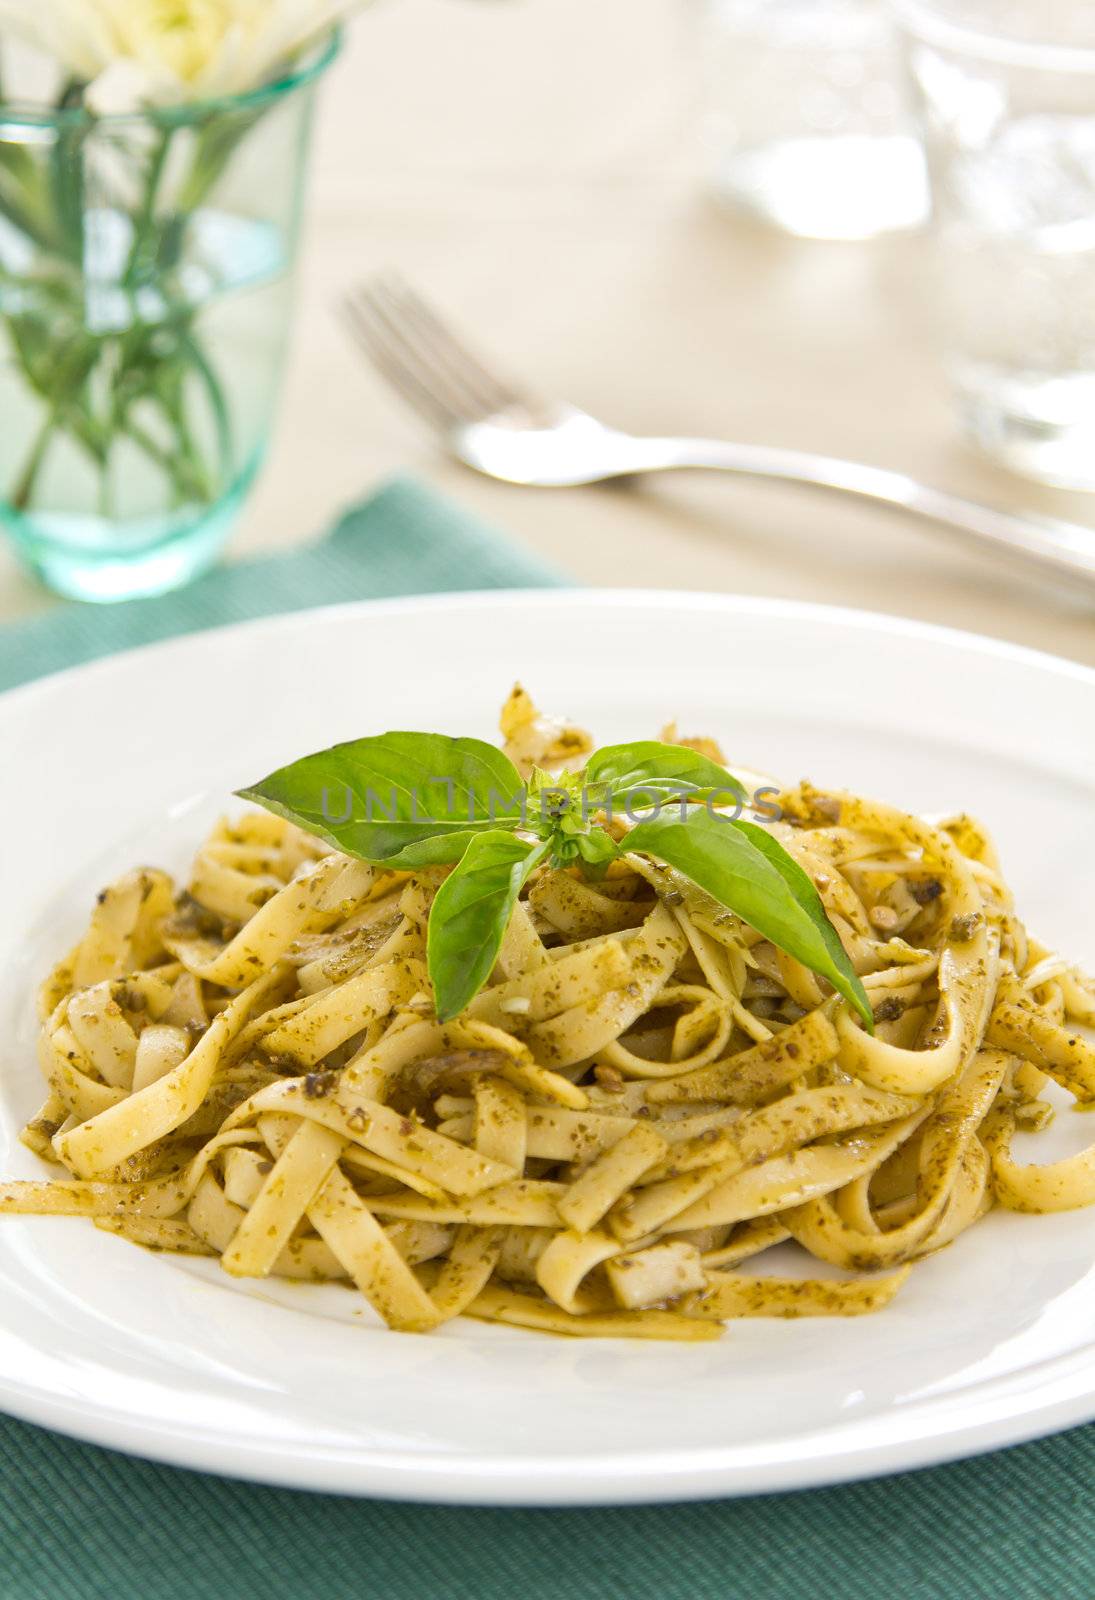 Fettuccine with pesto by vanillaechoes